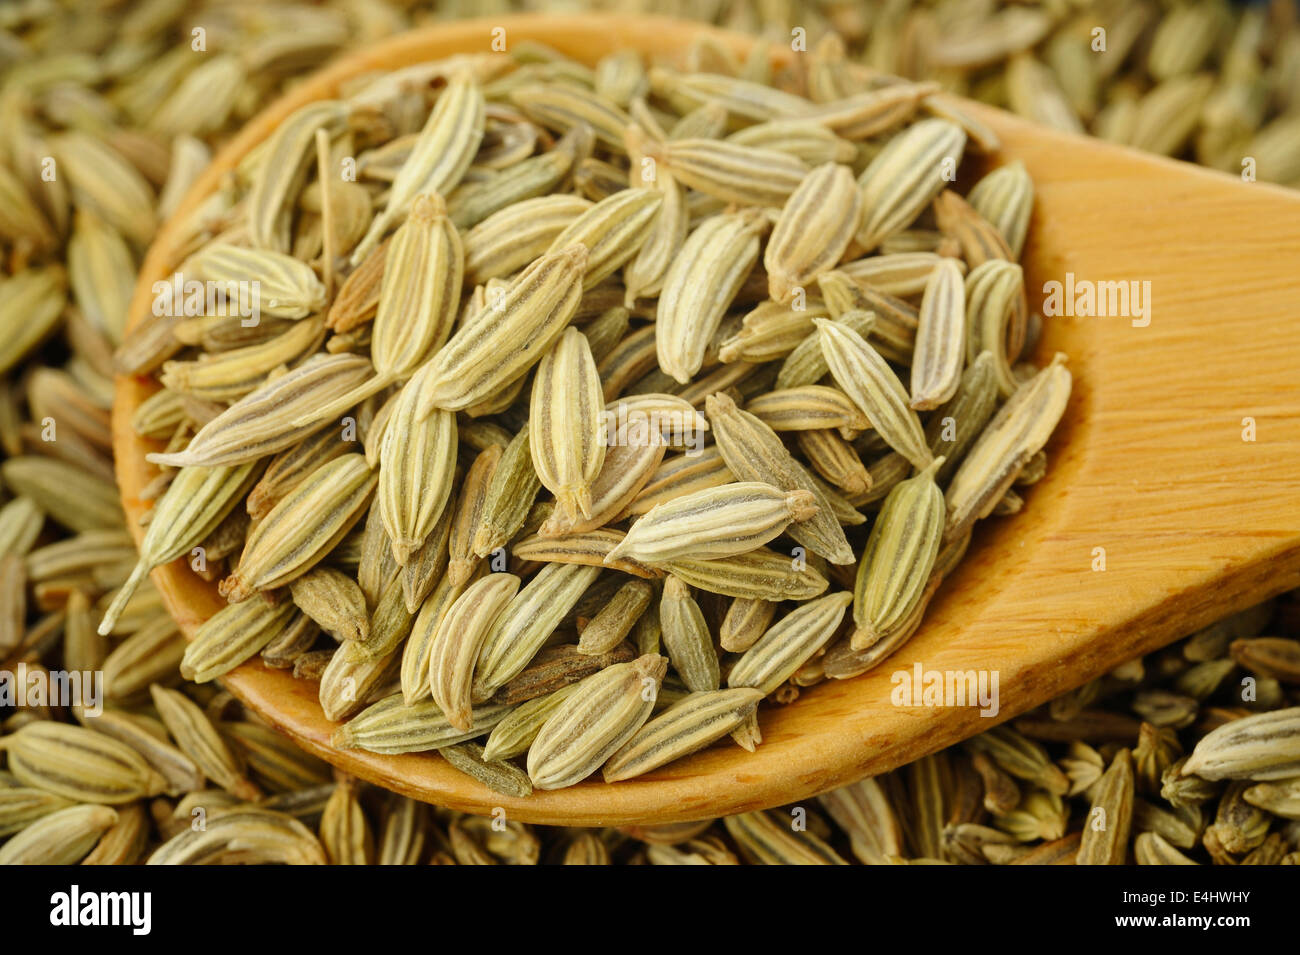 Fennel seeds in wooden spoon Stock Photo